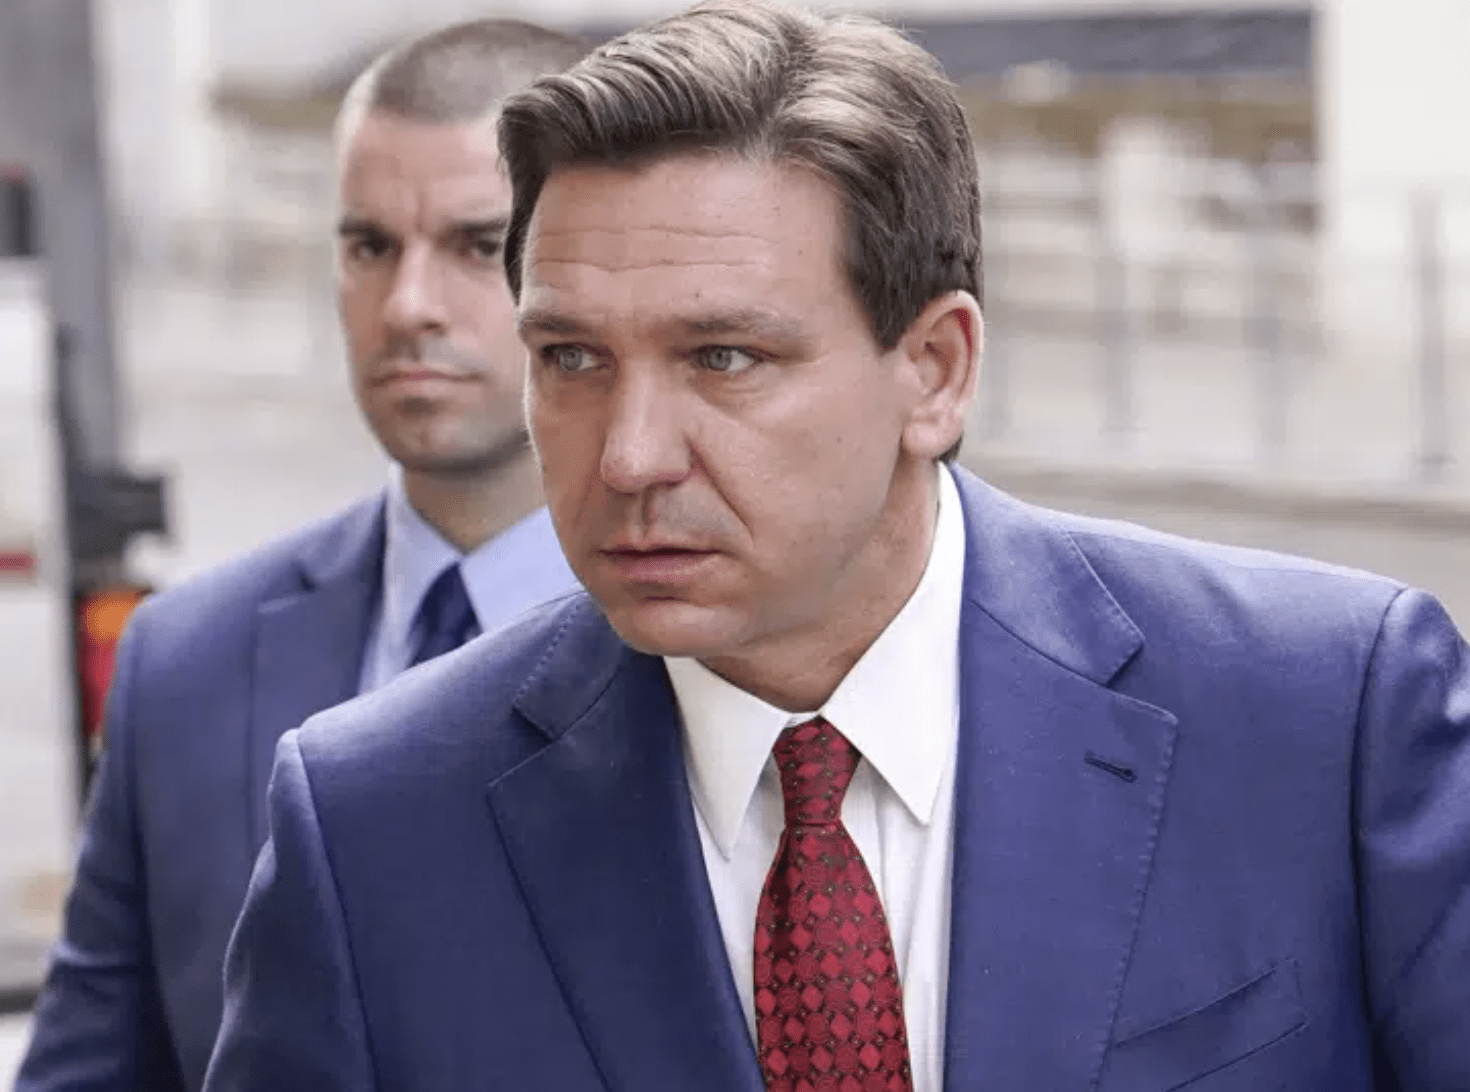 Florida Republican Gov. Ron DeSantis arrives at the Foreign Office to visit Britain's Foreign Secretary in London, Friday, April 28, 2023. (AP Photo/Alberto Pezzali)